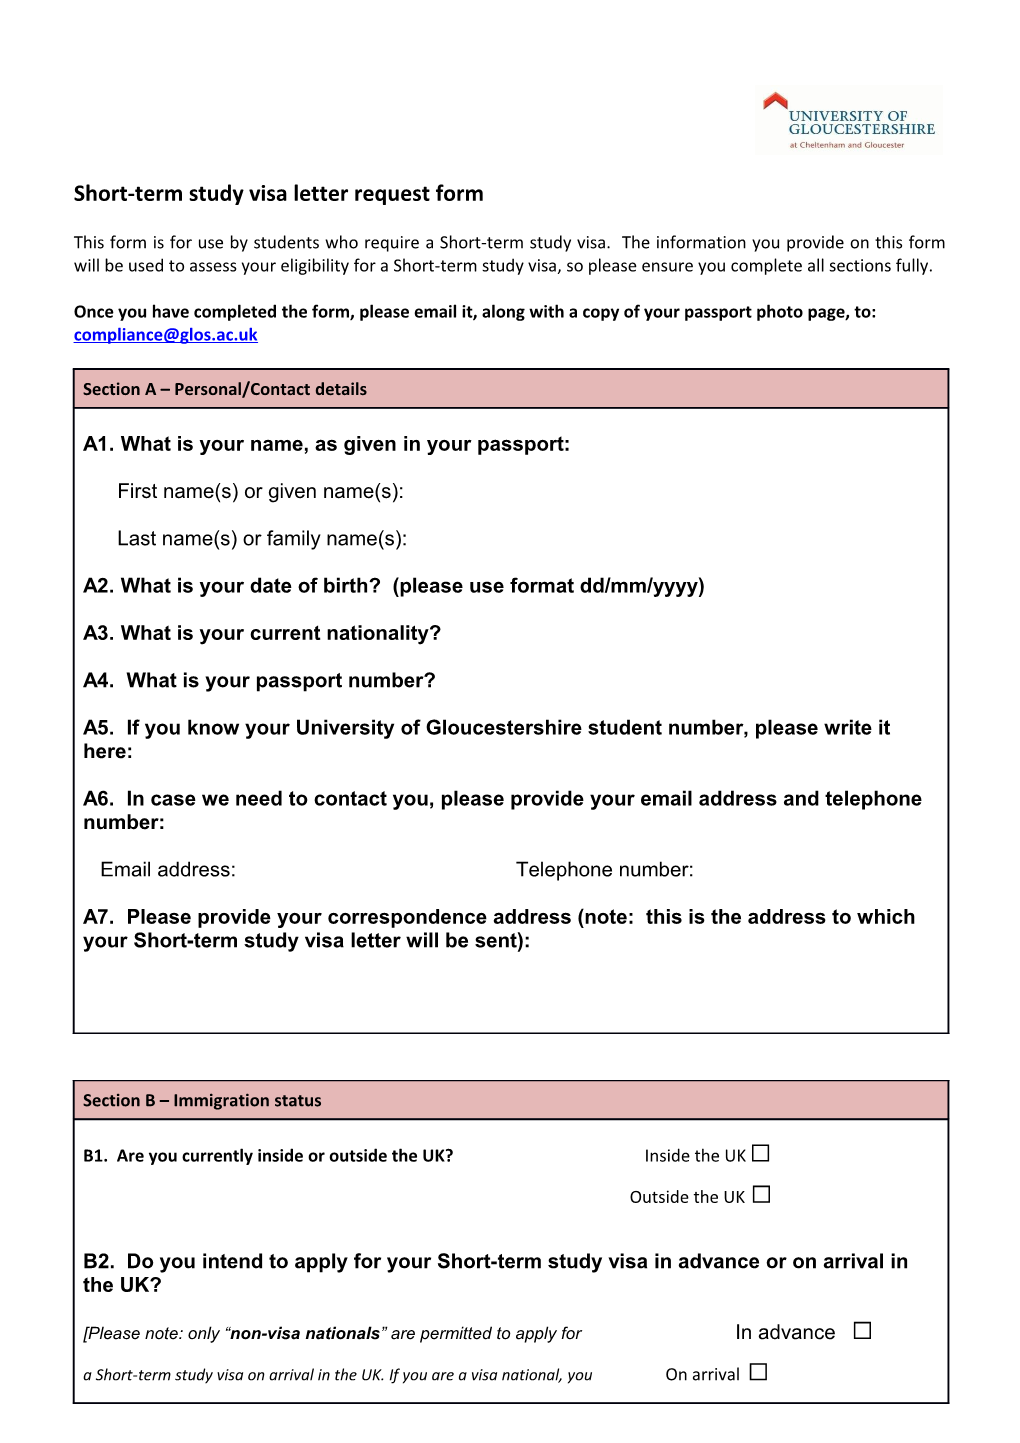 Once You Have Completed the Form, Please Email It, Along with a Copy of Your Passport